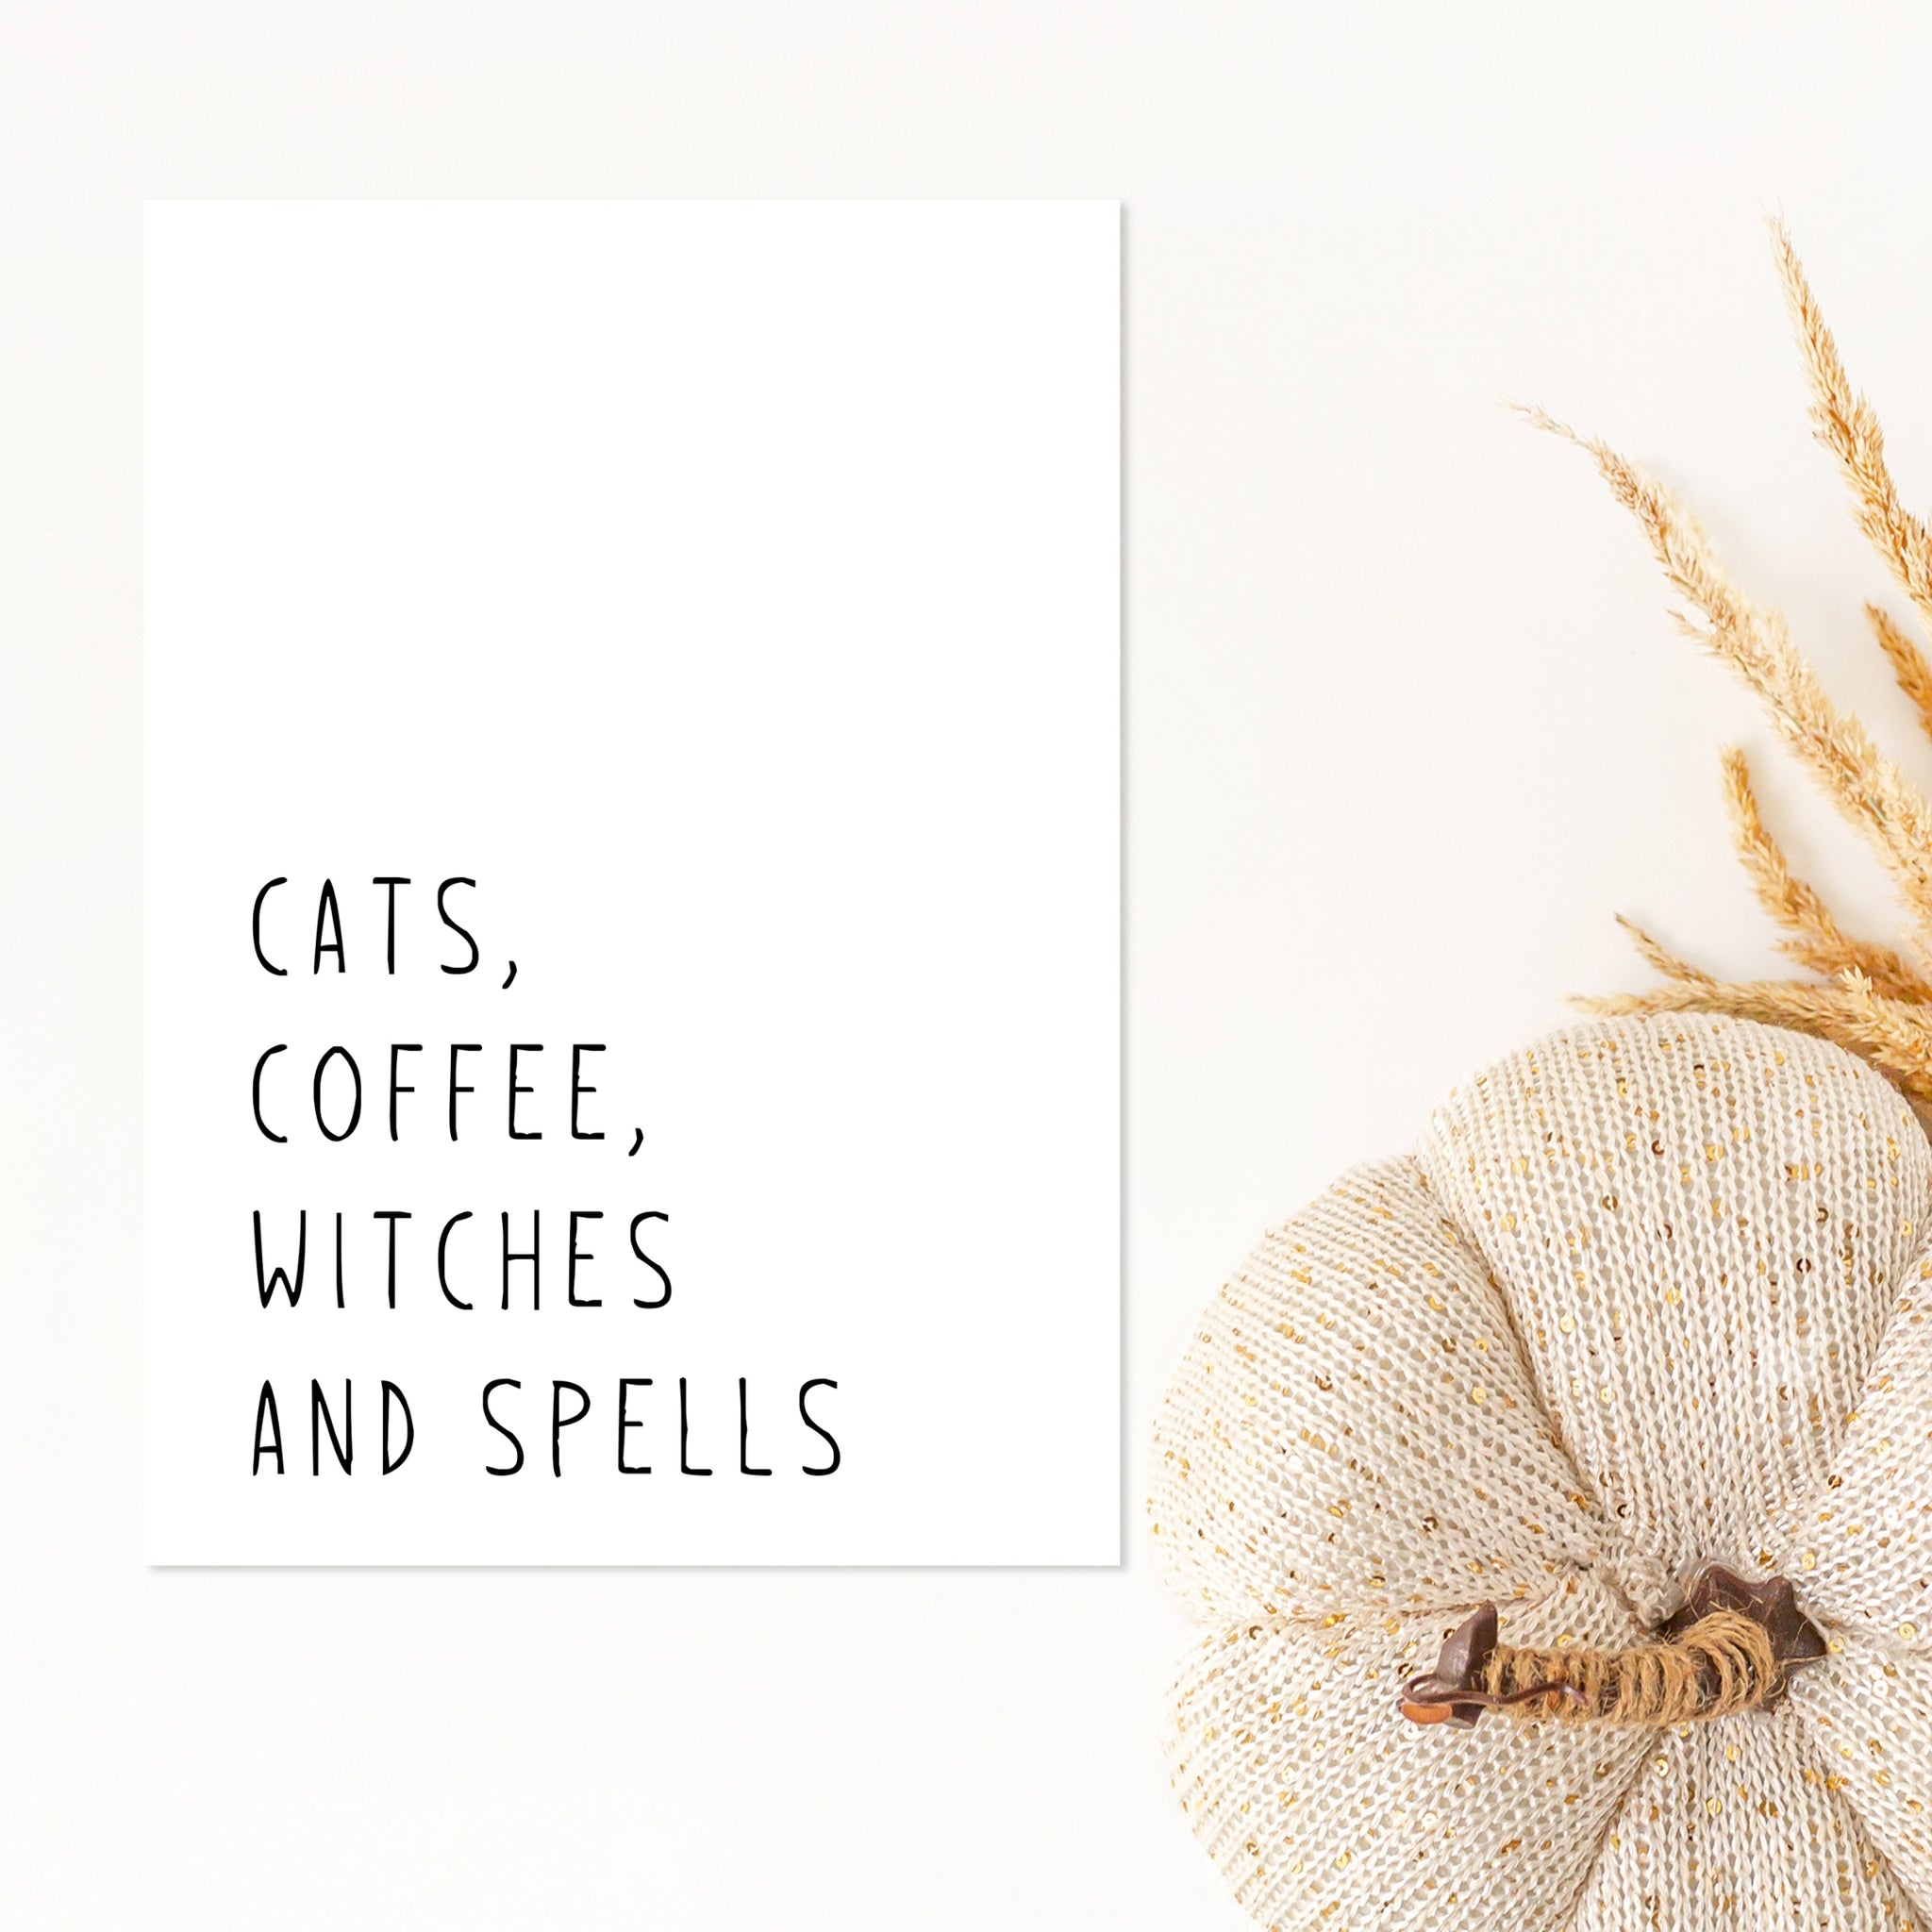 Witches and spells - Affiche décorative